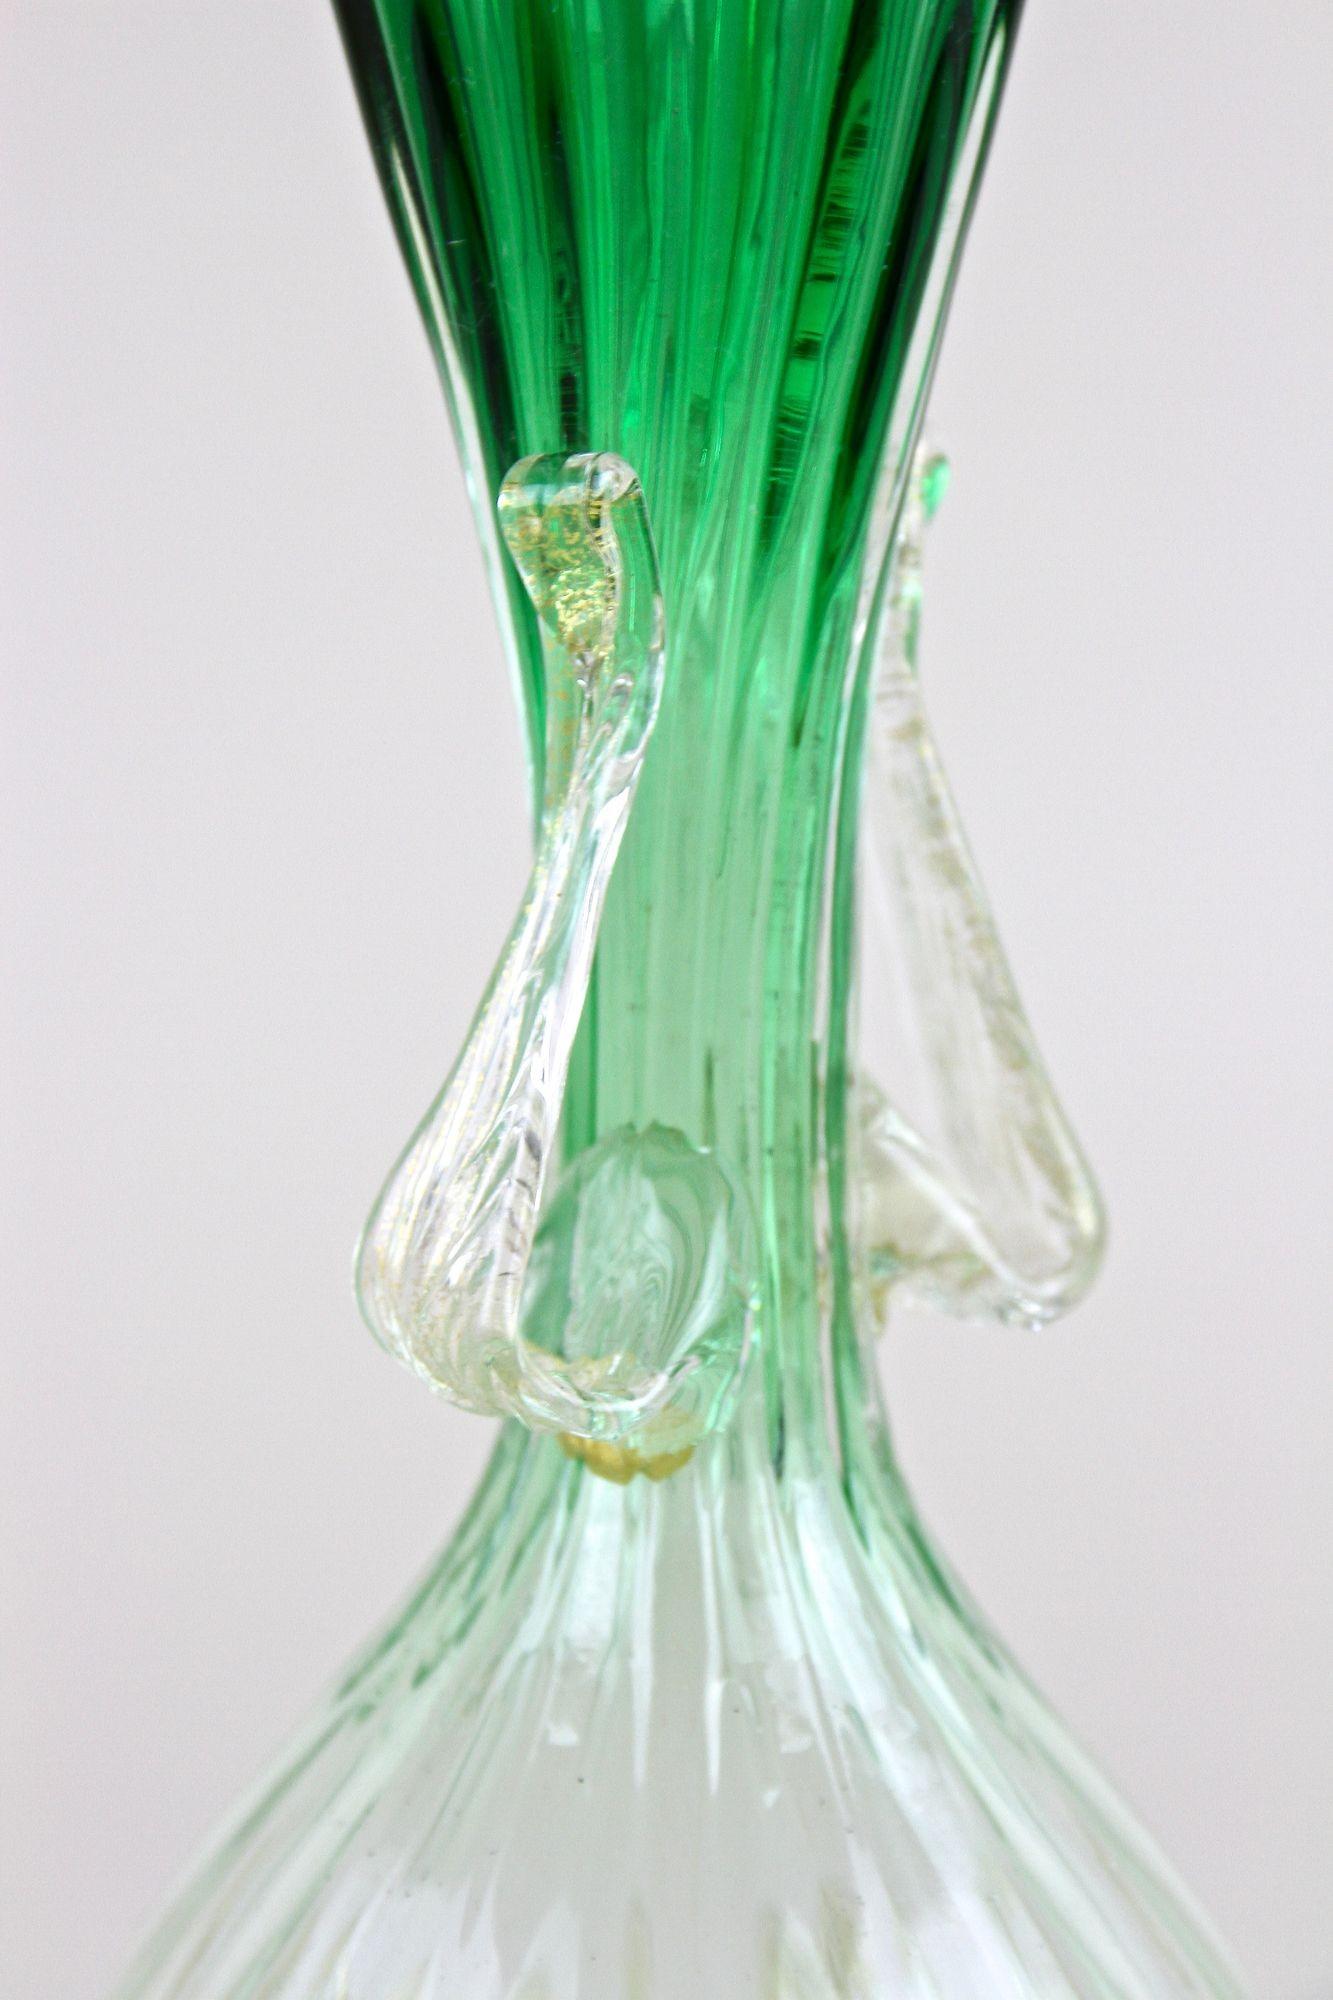 20th Century Green/ White Murano Glass Vase With 24k Gold Flakes by Fratelli Toso, IT ca 1930 For Sale